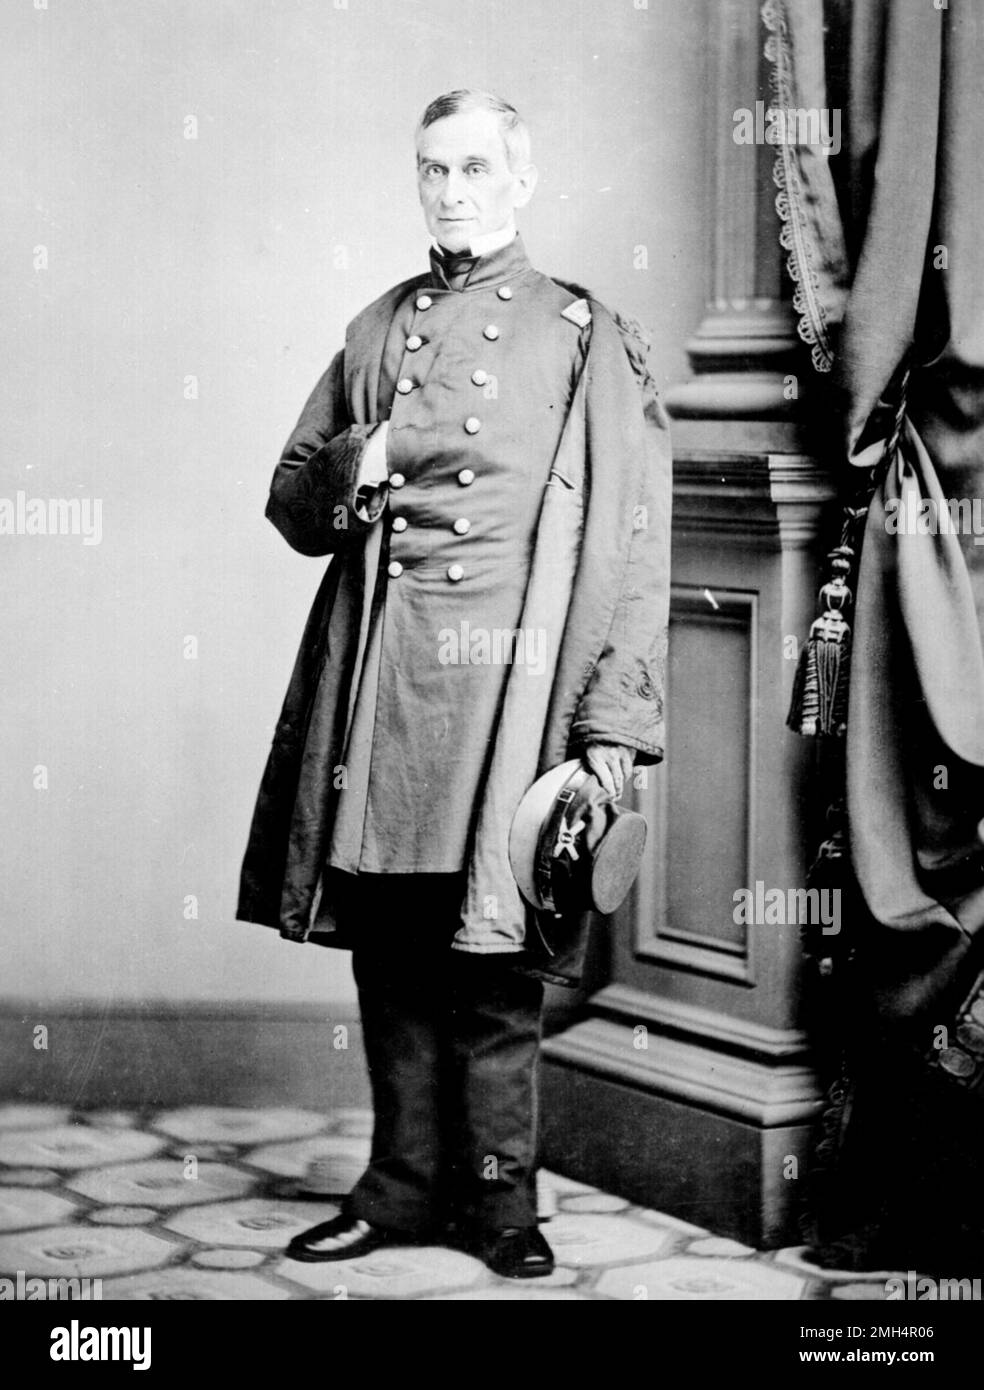 Major Robert Anderson, who was the Unionist commander of Fort Sumter. The Confederate bombardment and capture of Fort Sumter was the opening battle in the American Ciil War. Stock Photo